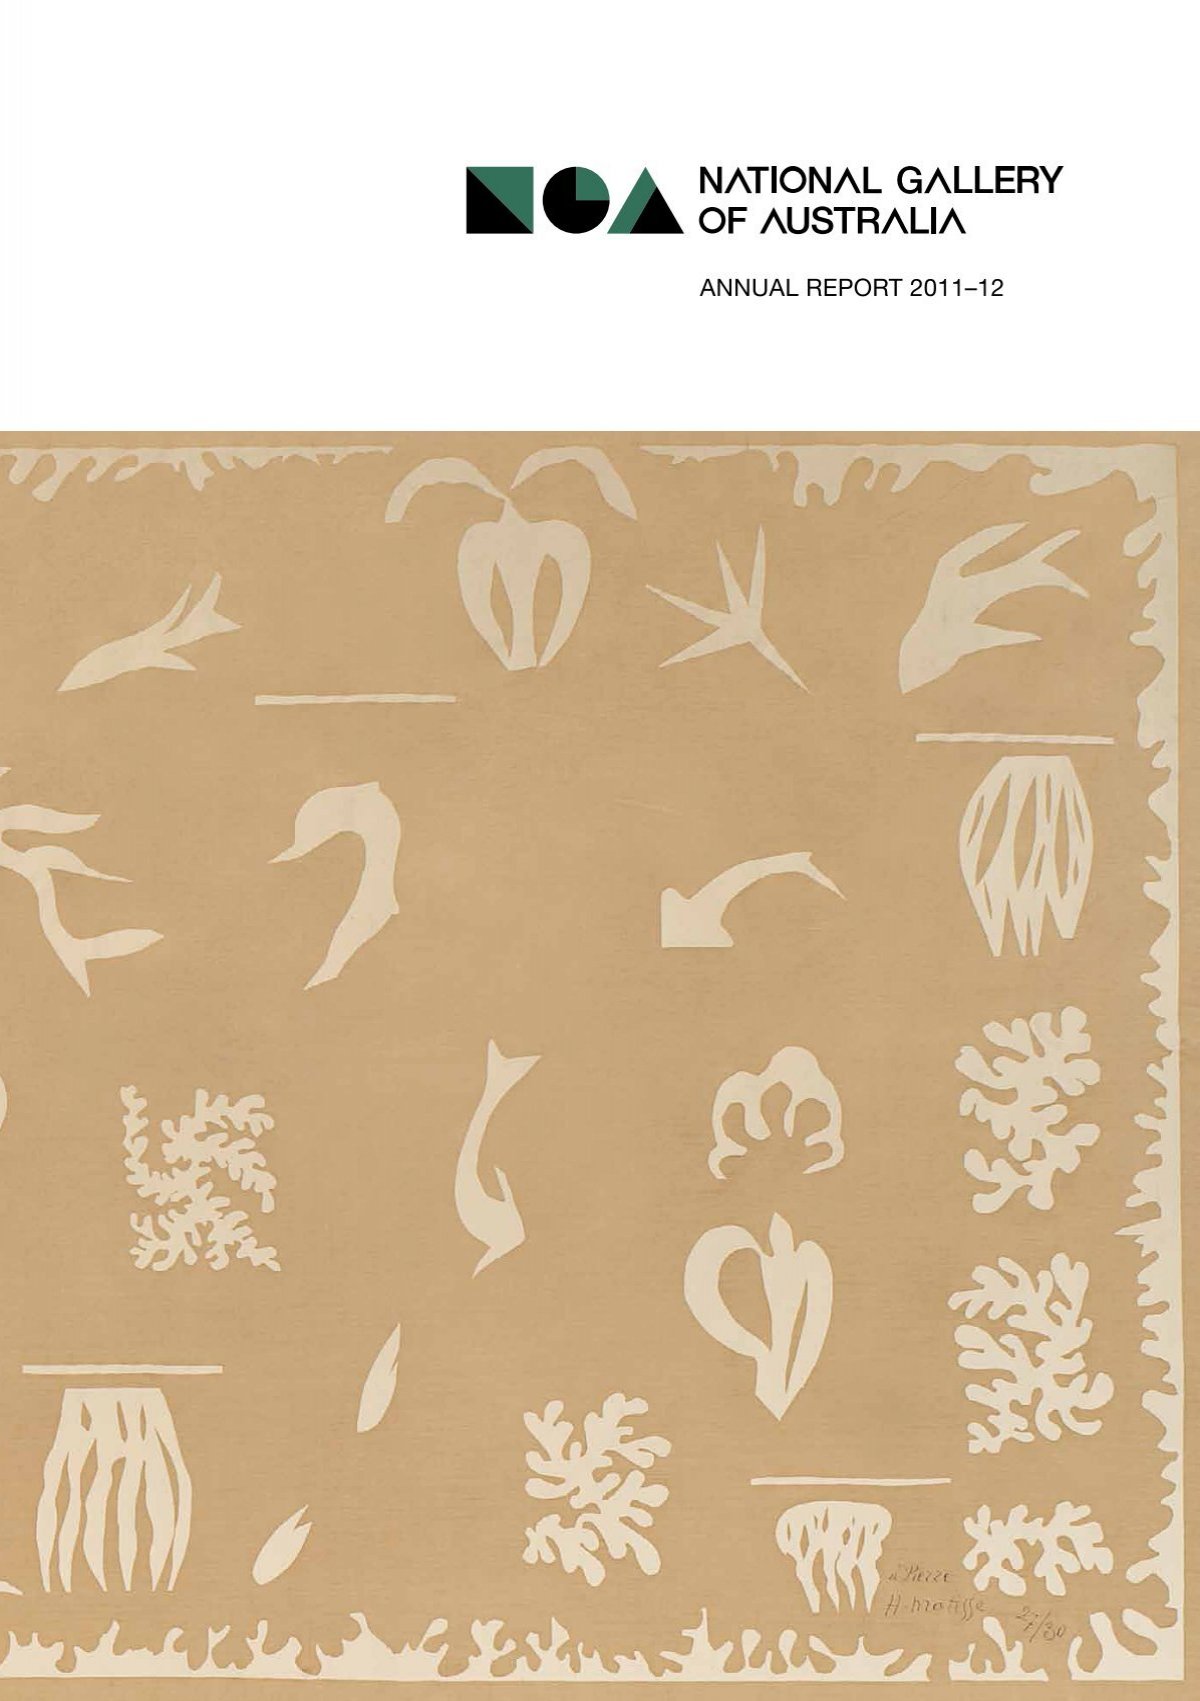 ANNUAL REPORT 2011â€“12 - National Gallery of Australia